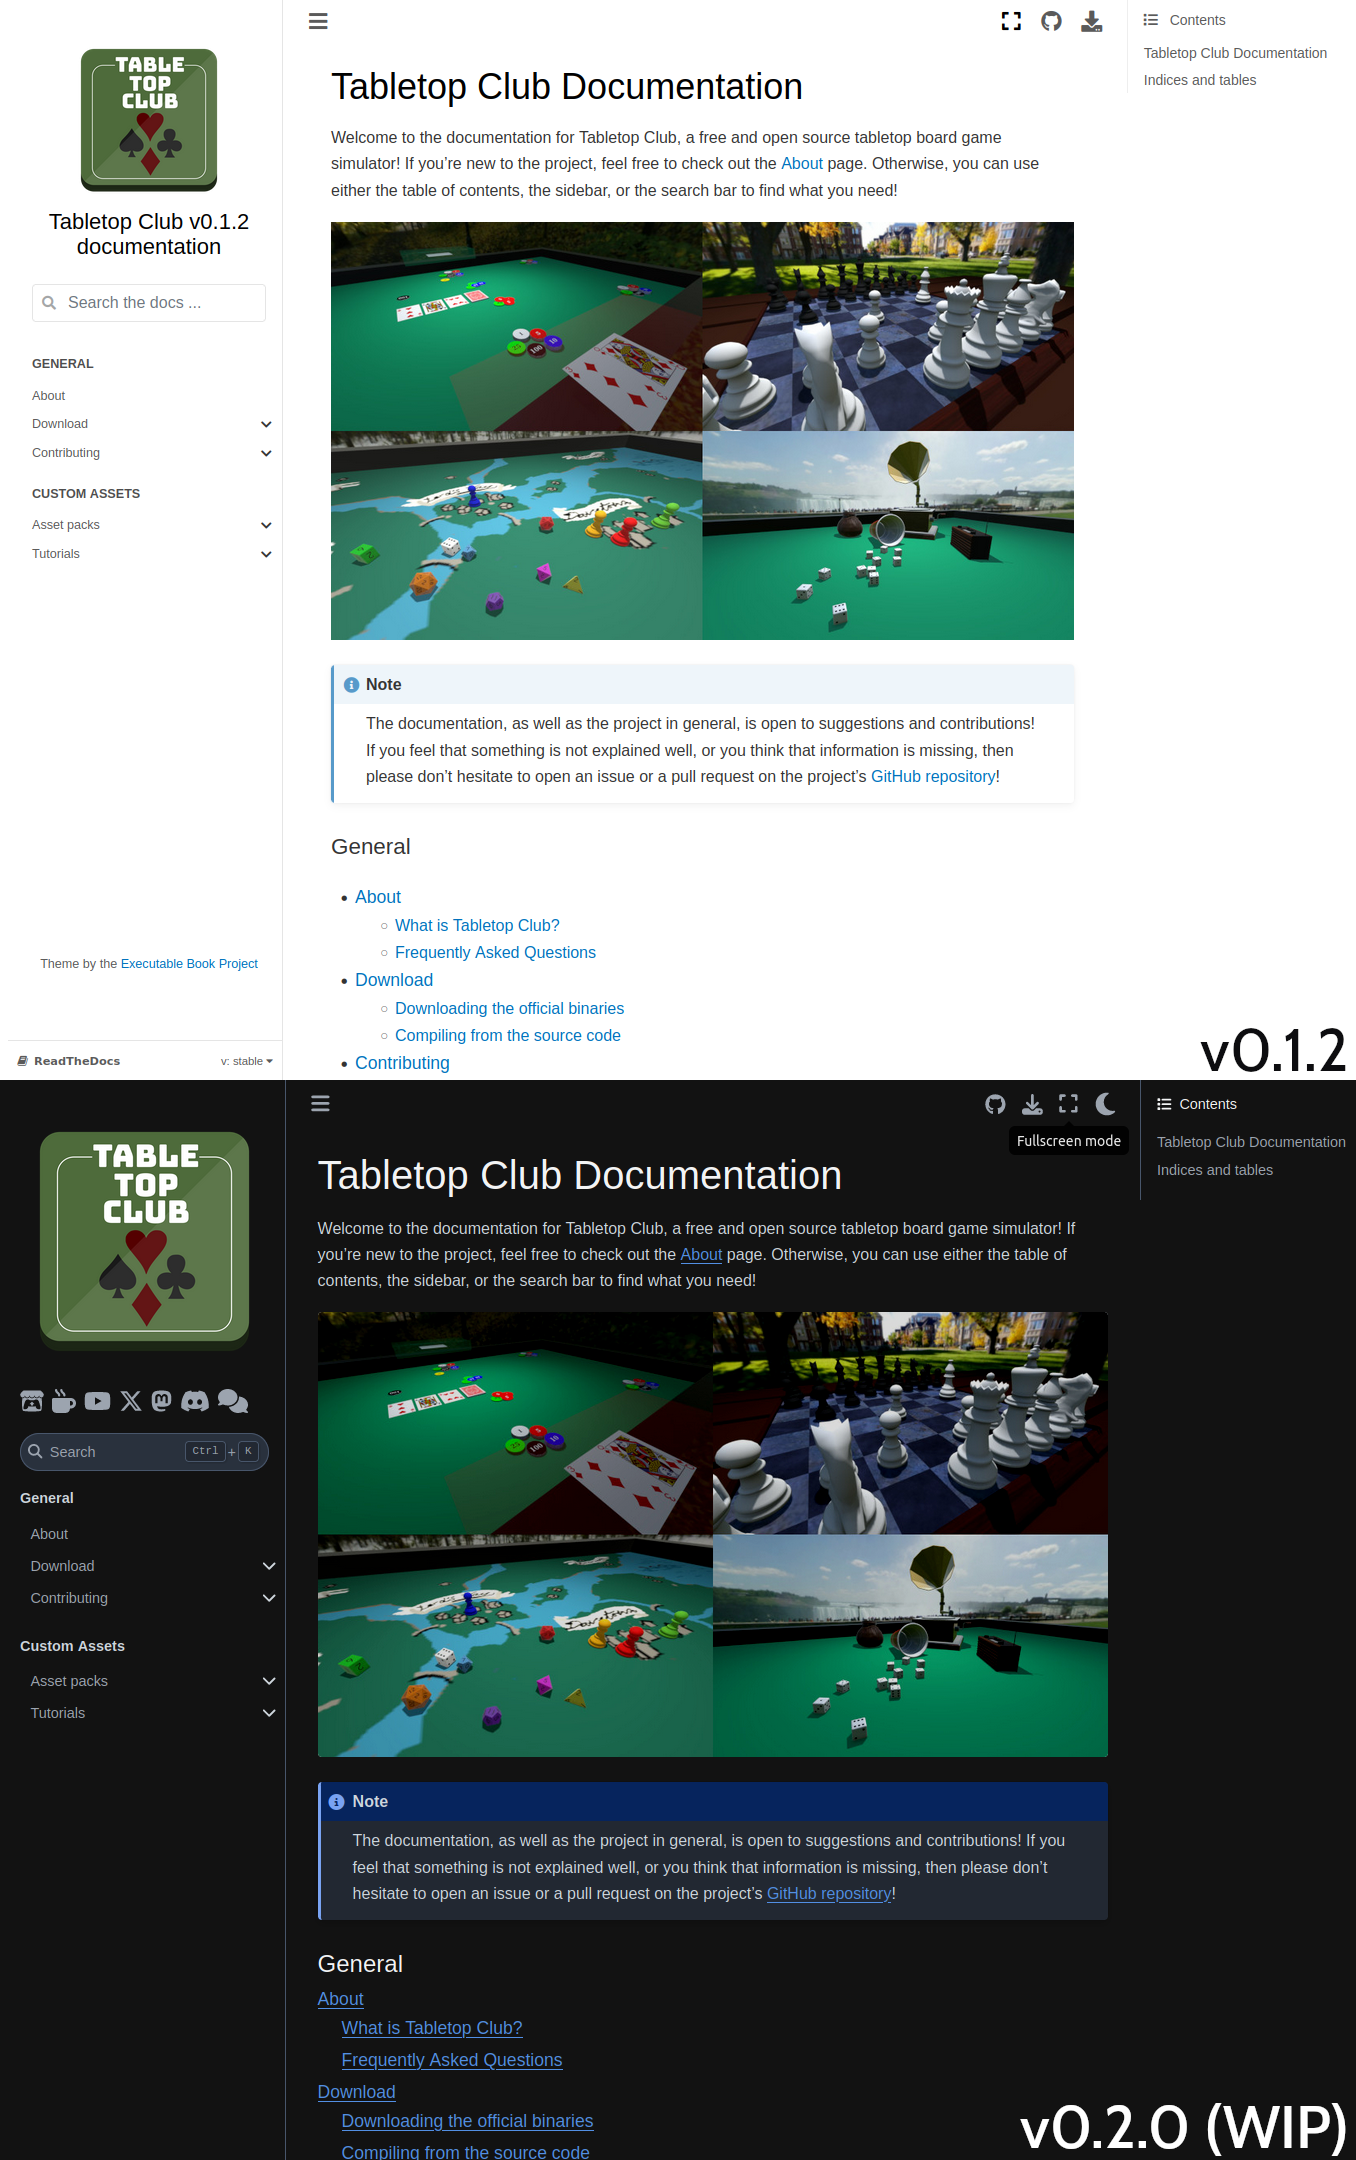 A comparison between the v0.1.2 documentation home page and the v0.2.0 home page.